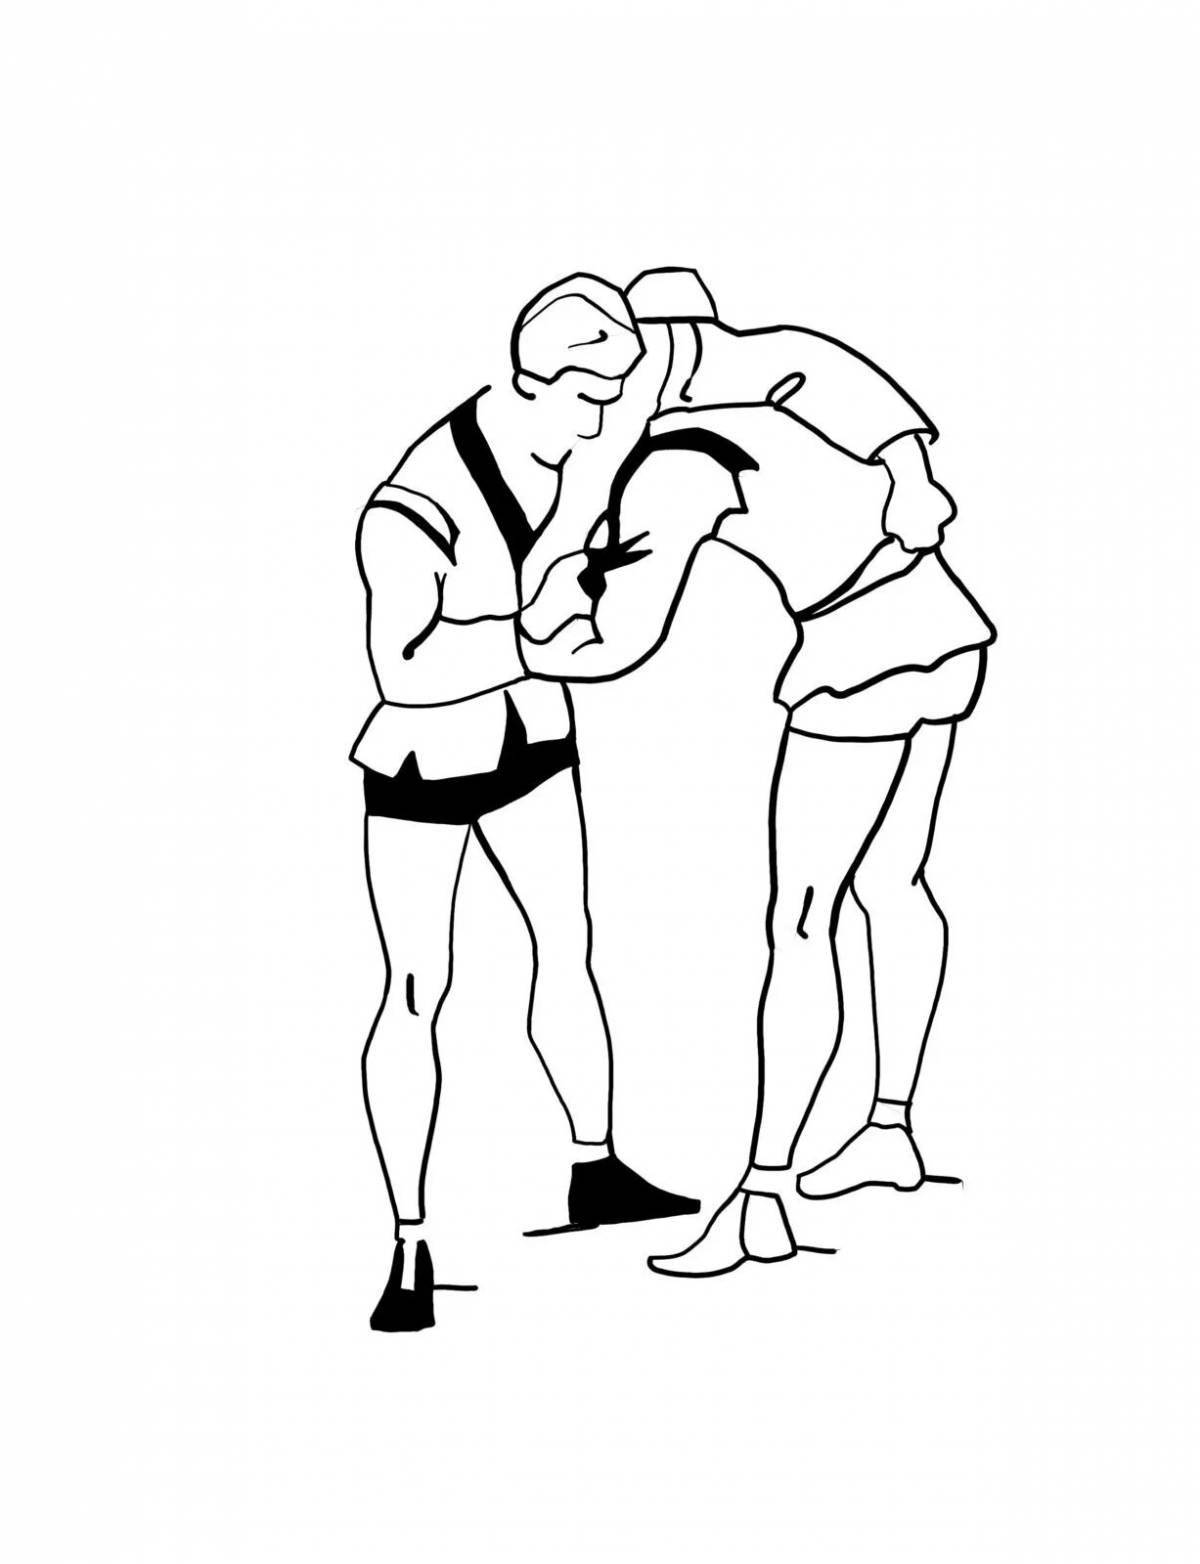 Colorful wrestlers coloring pages